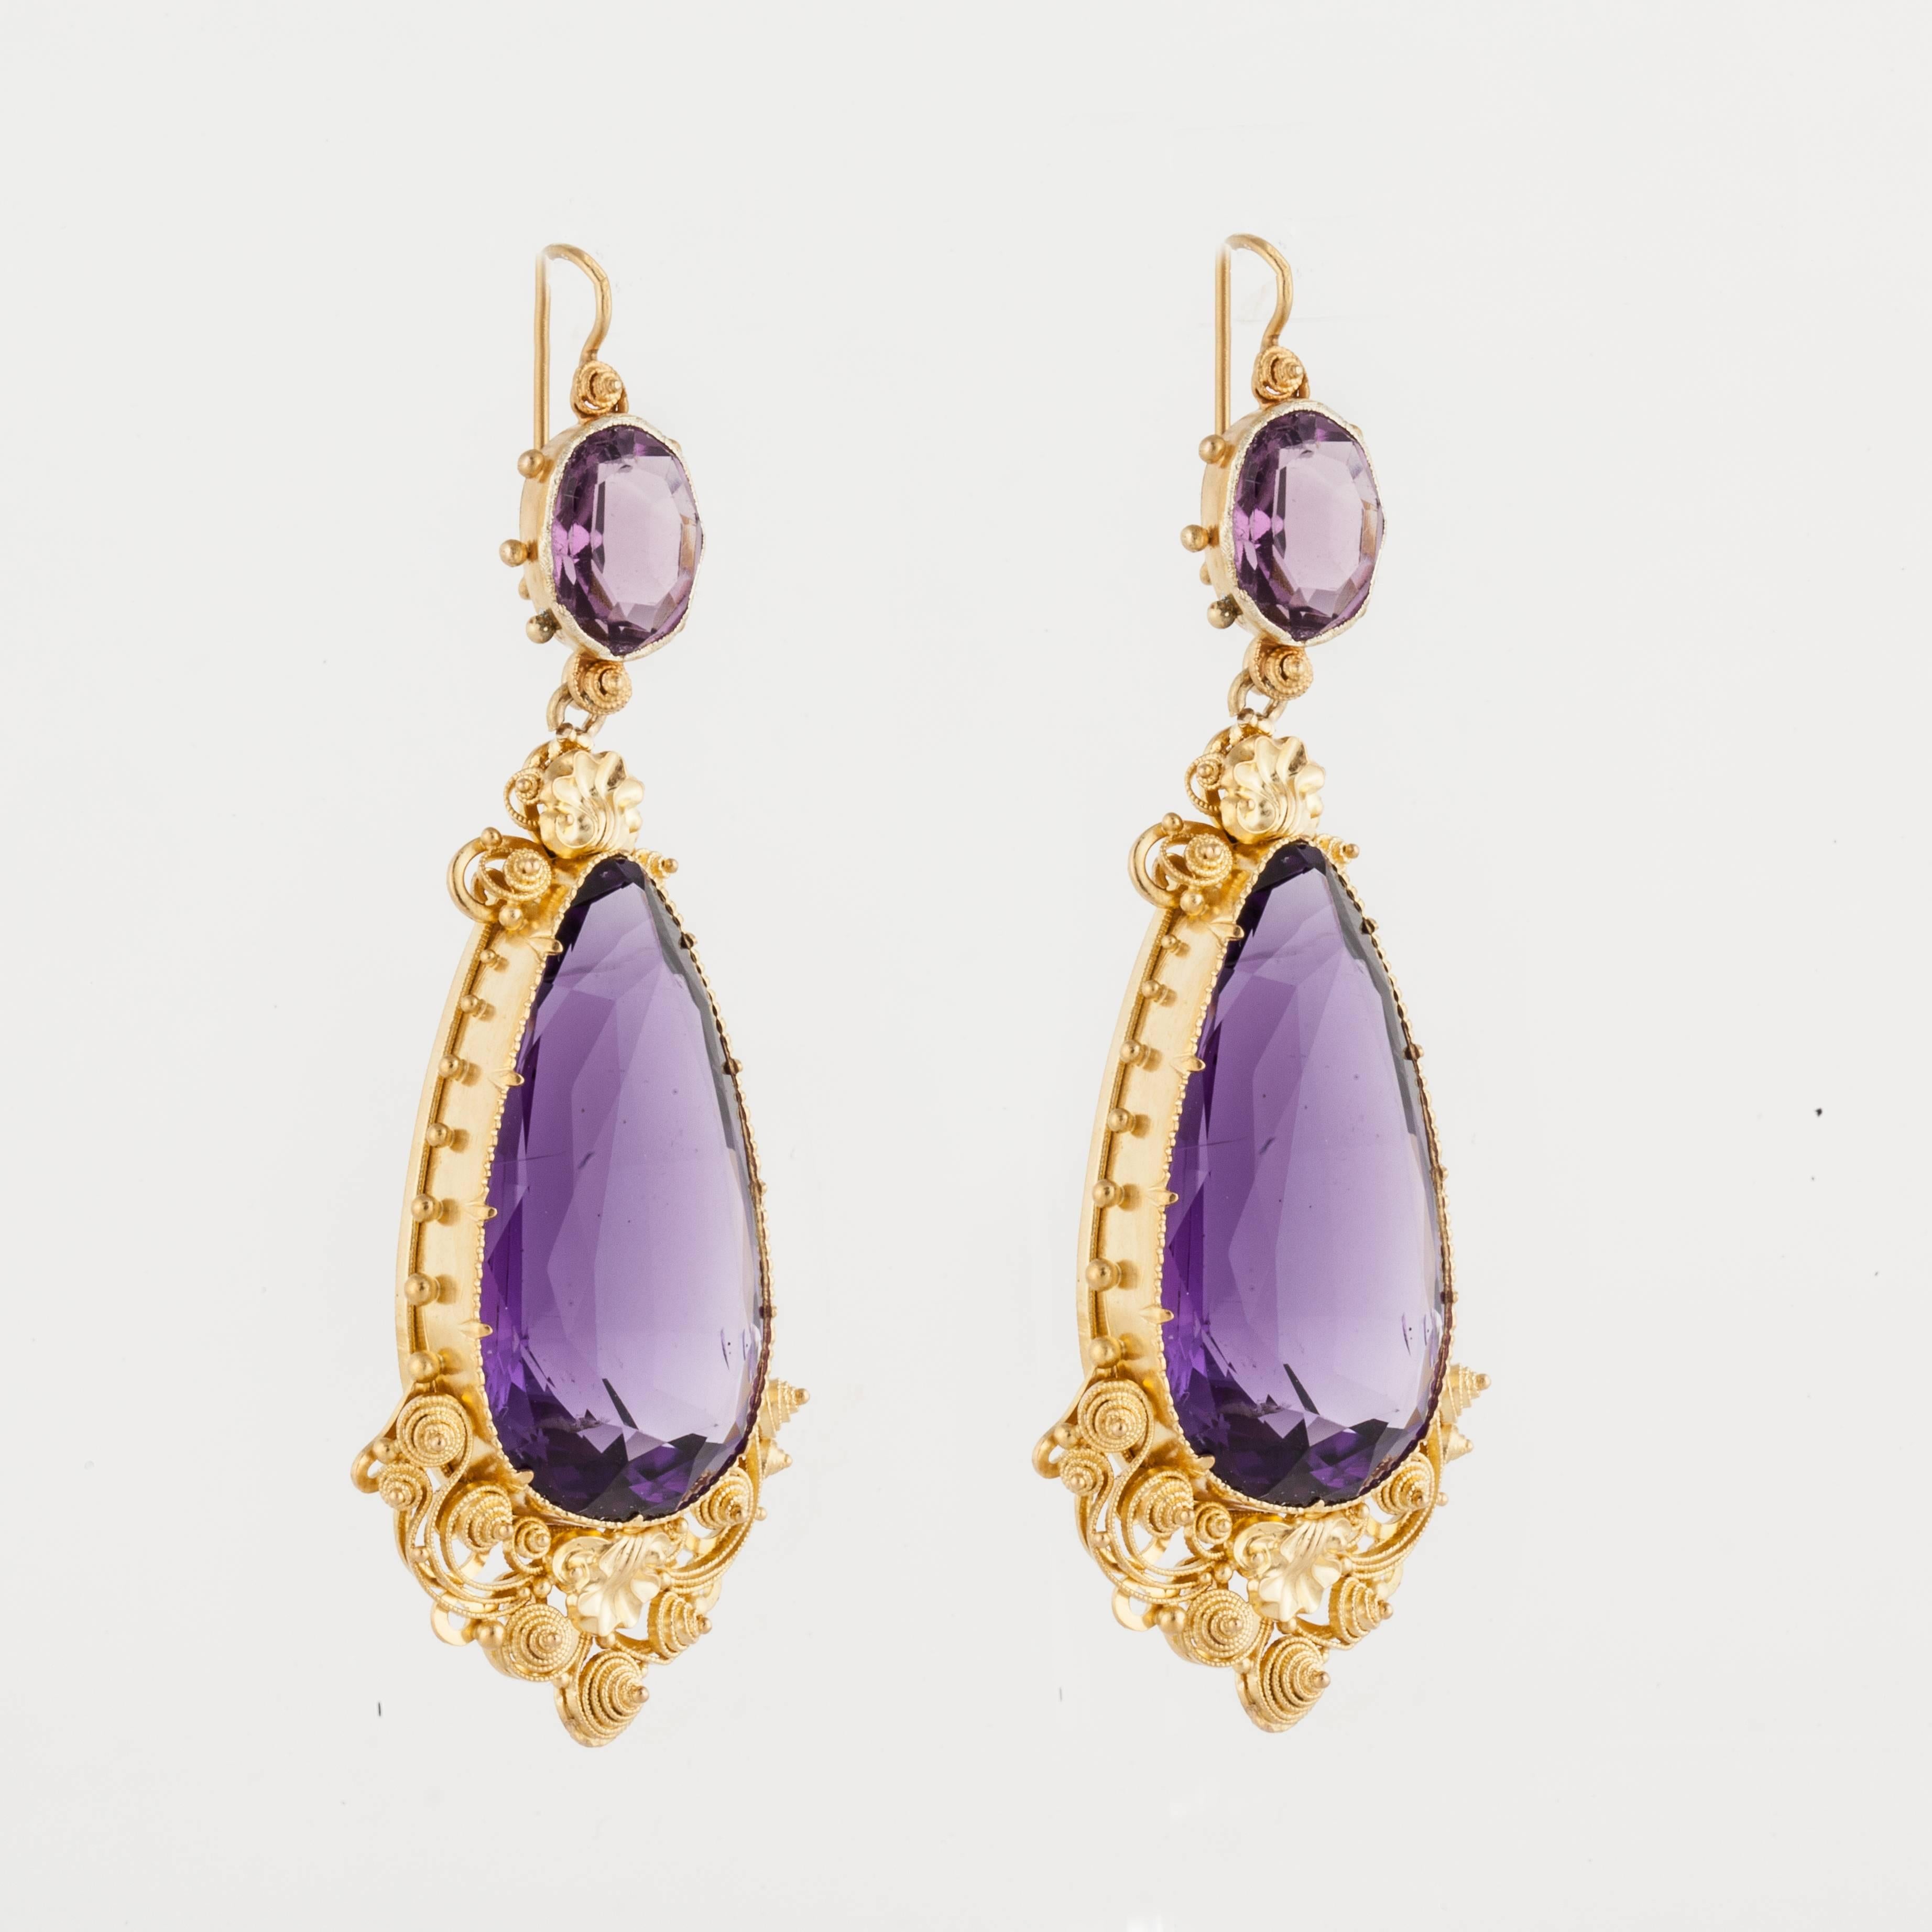 Antique drop earrings crafted in 22K yellow gold featuring oval and pear-shaped amethysts that total 79 carats.  The Etruscan gold work is fine and detailed.  The earrings measure 2 3/4 inches long and 1 inch wide at the bottom.  These are for